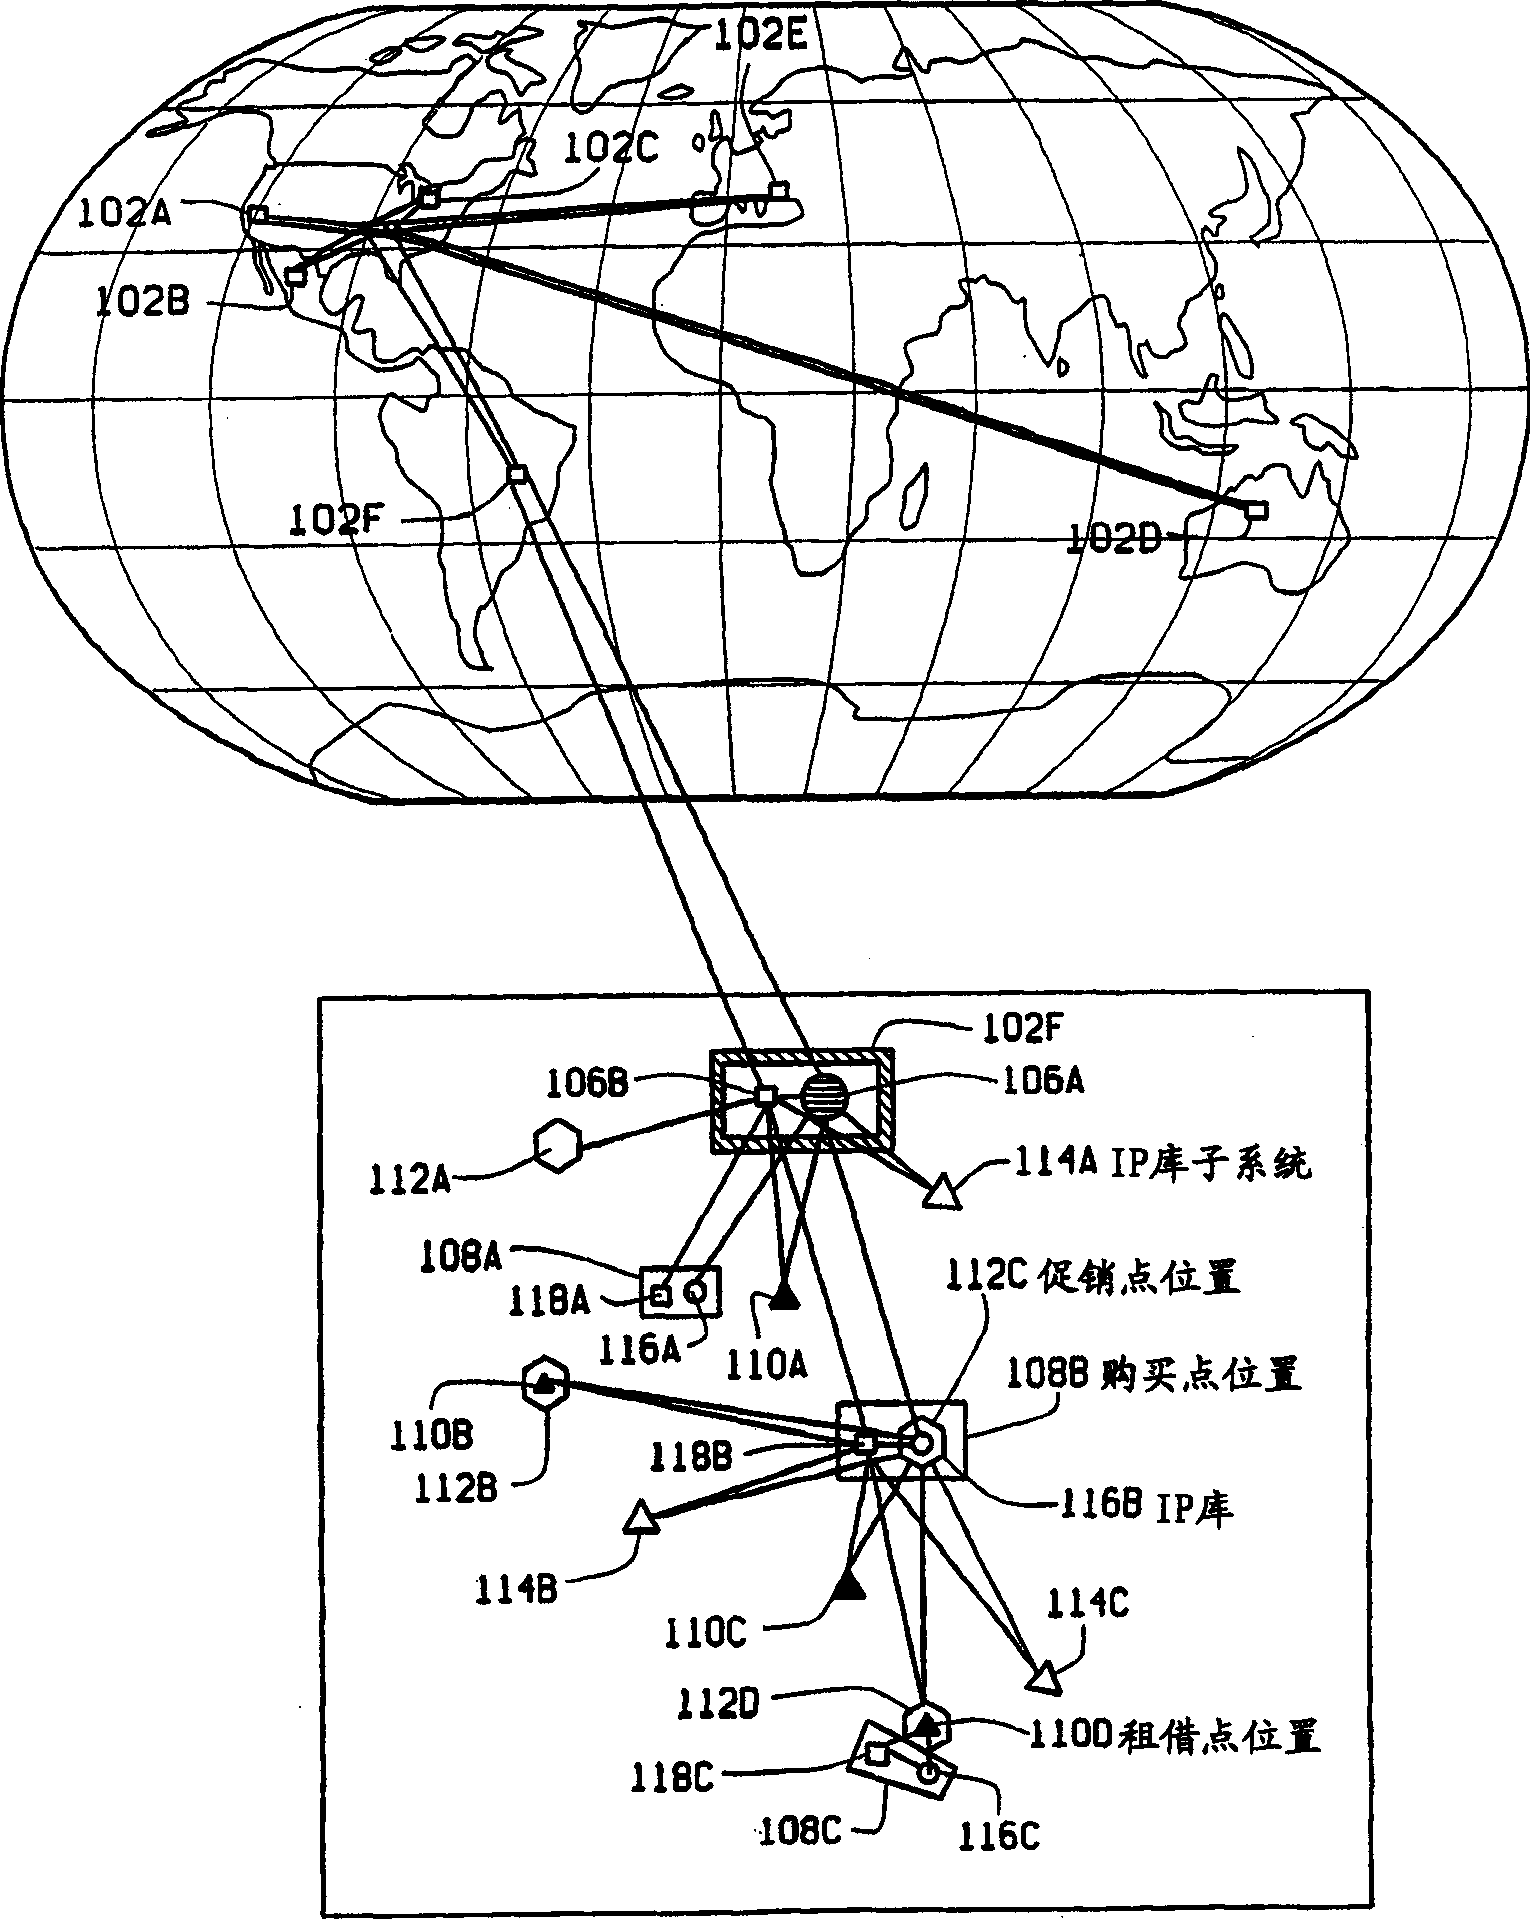 Methods and devices for storing, distributing and accessing intellectual property in digital form